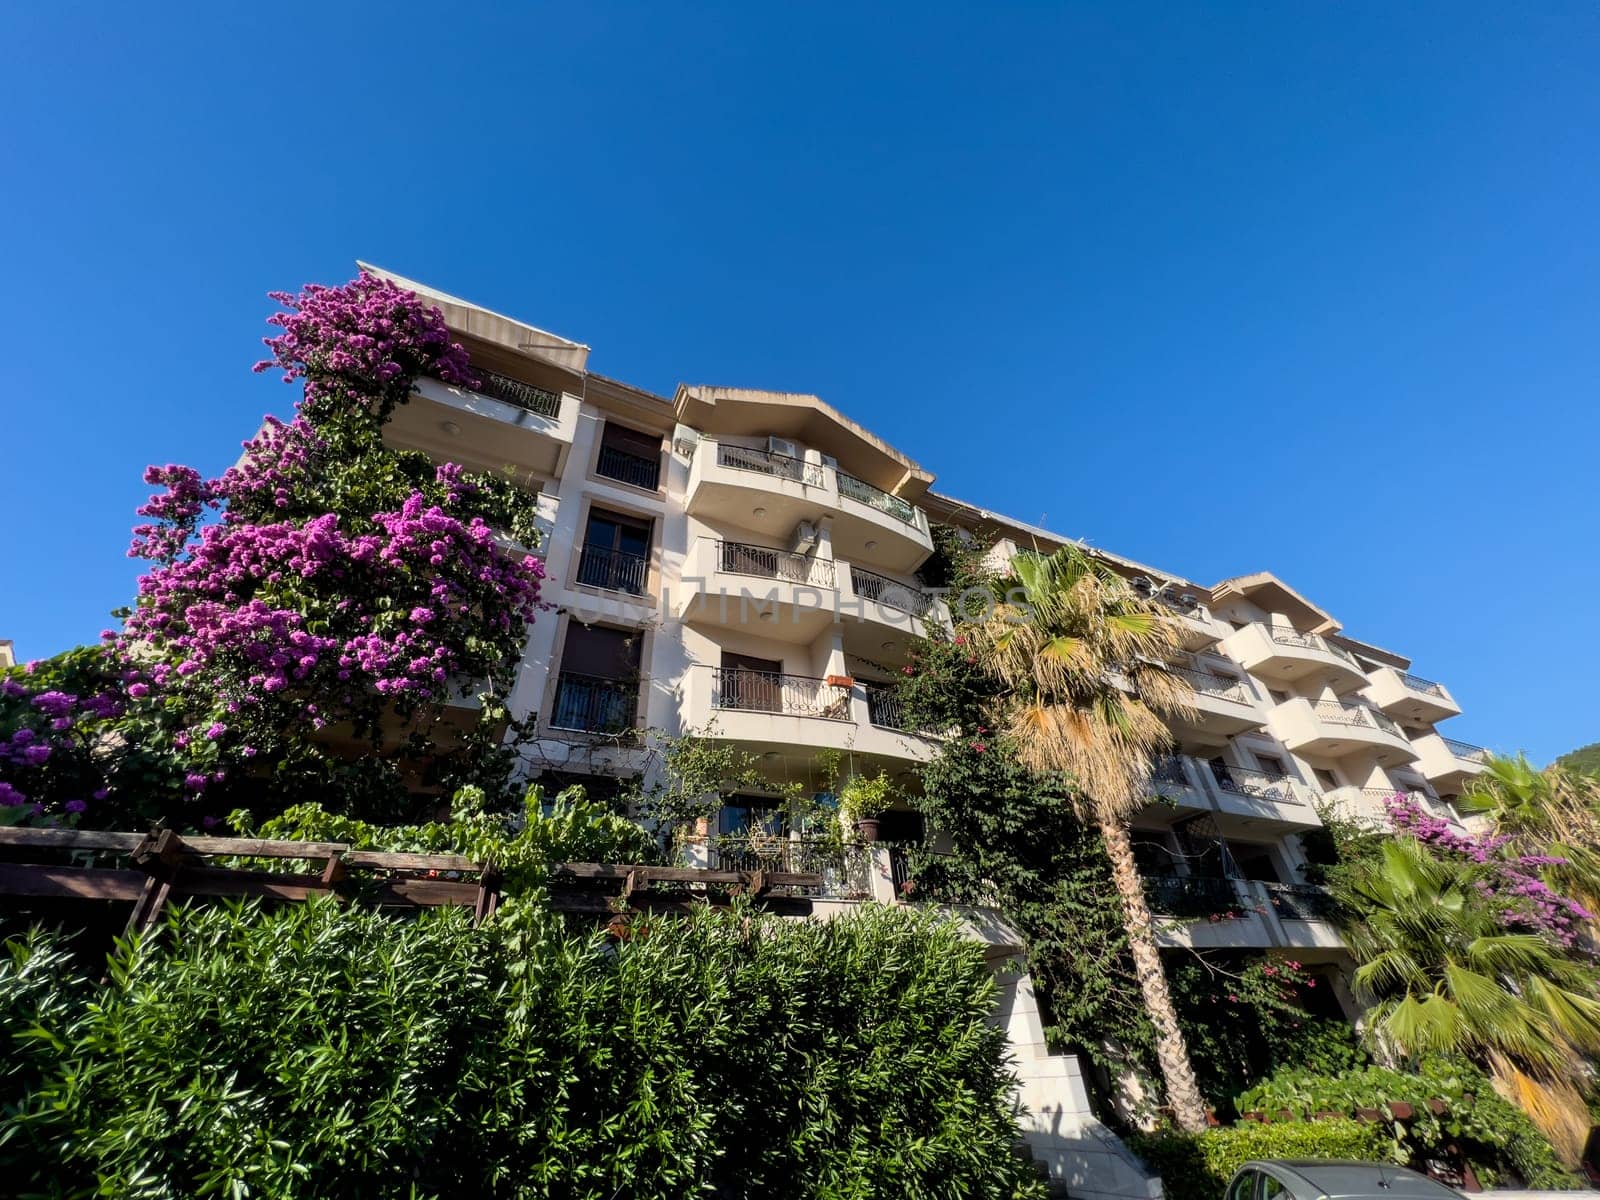 Multi-storey hotel with terraces and a green garden with blooming lilacs. High quality photo